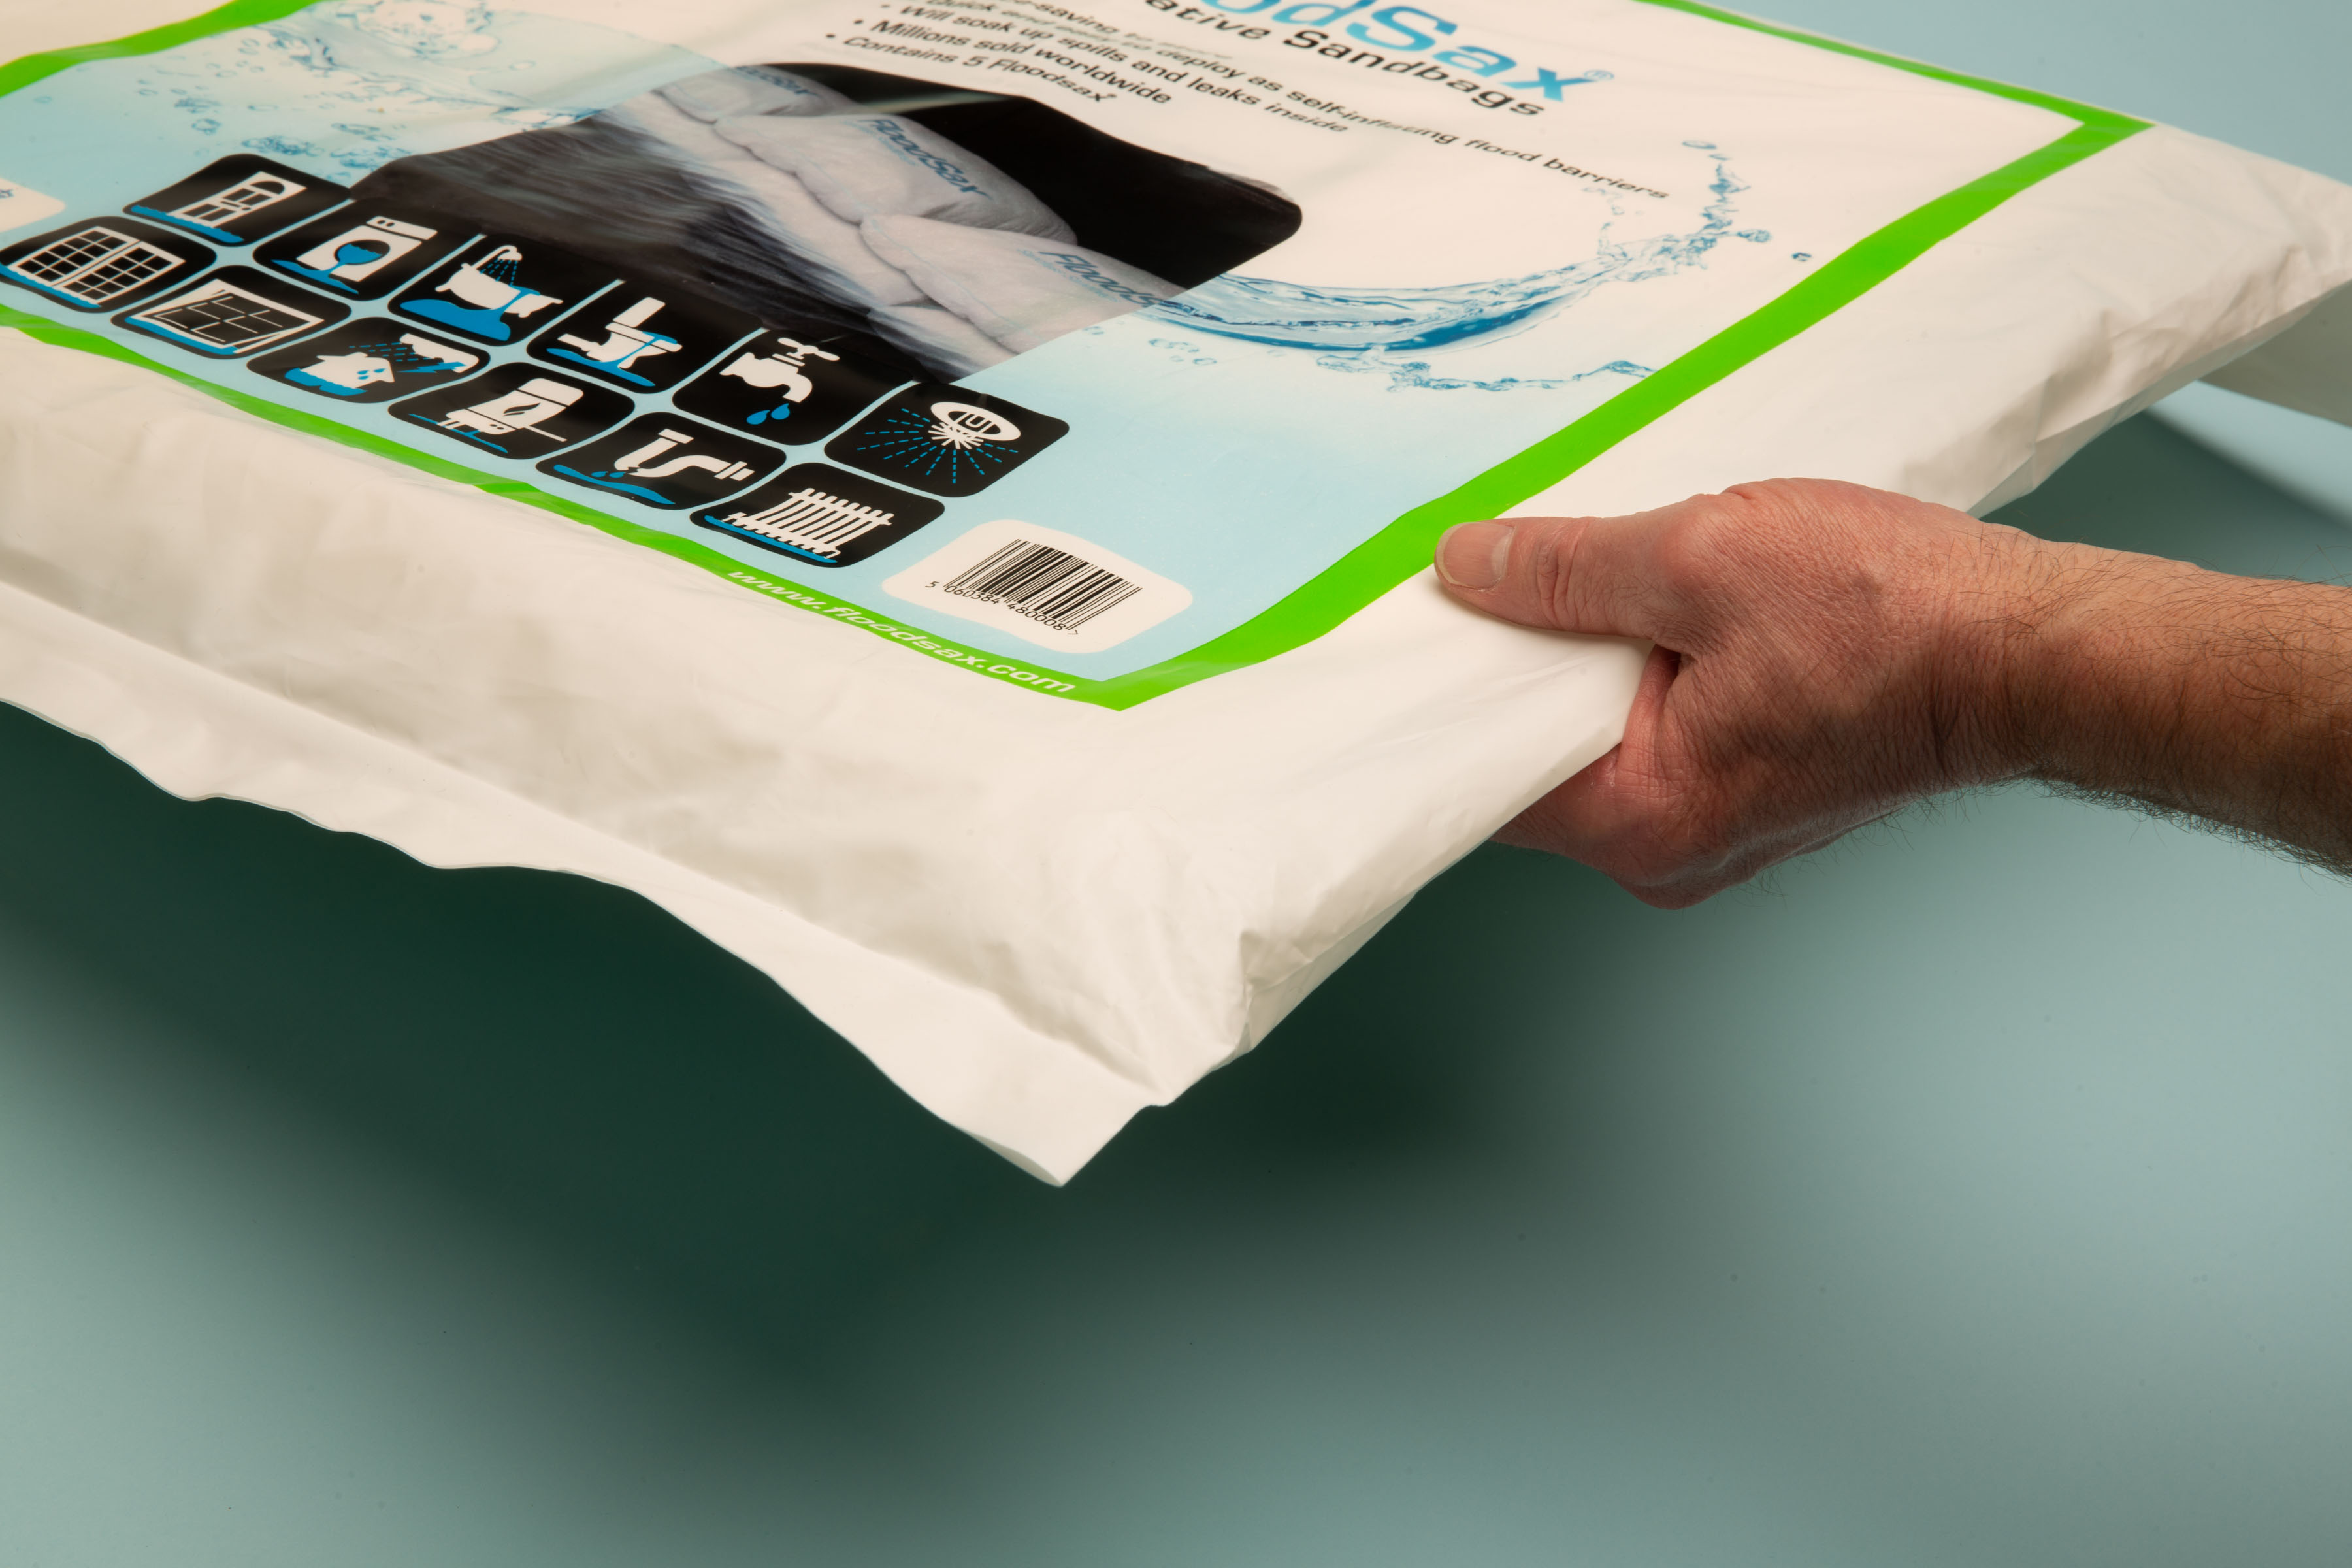 Close-up, high-resolution image of FloodSax packaging, showcasing clear branding and illustrative flood defense applications.